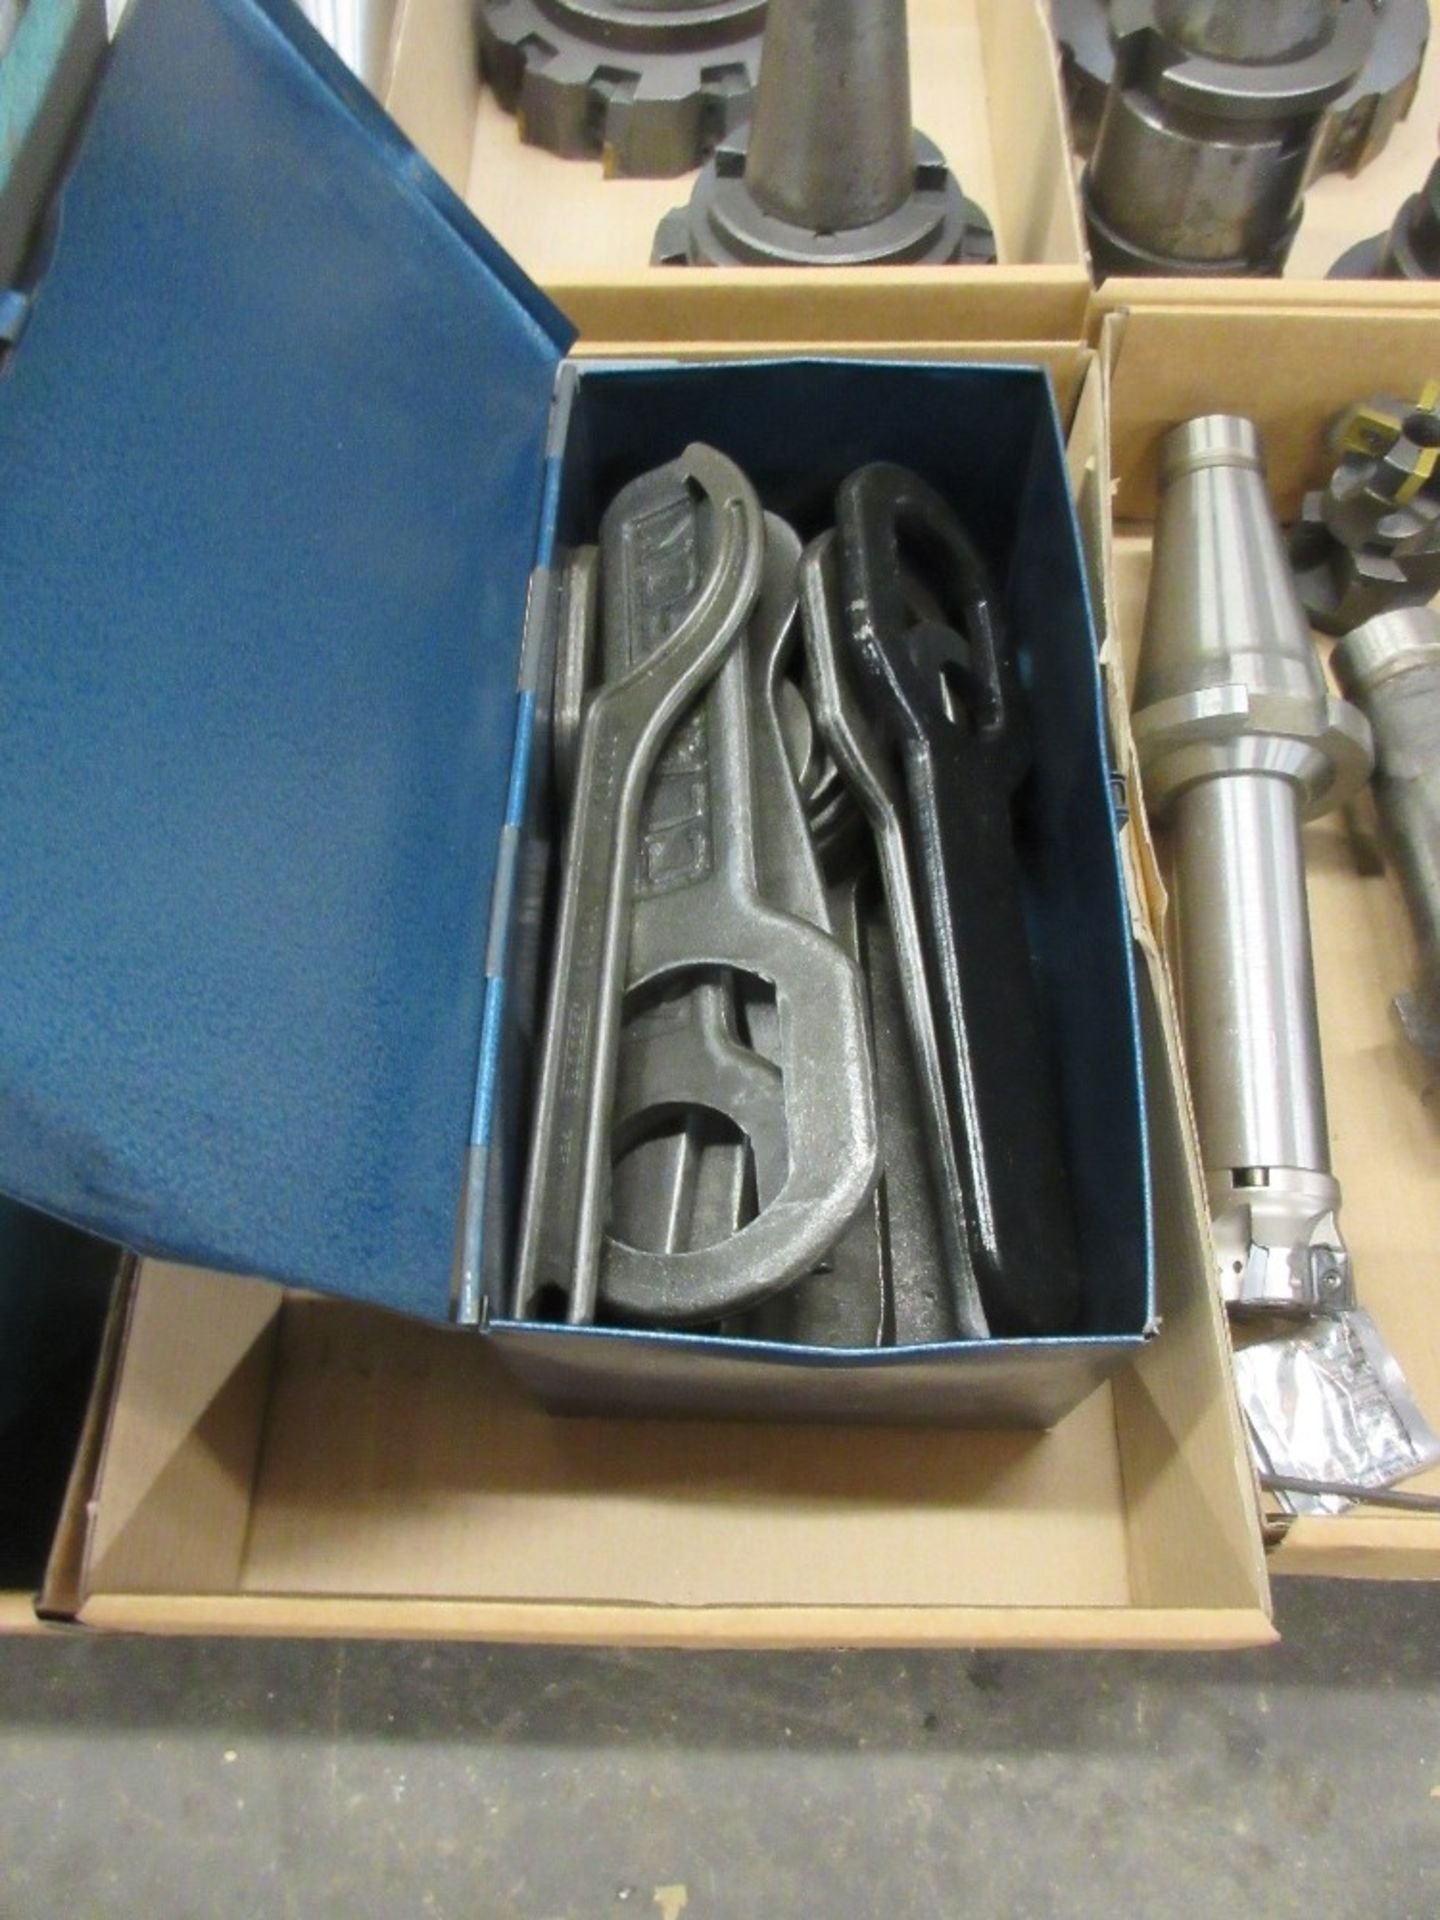 Box of Clarkson spanners